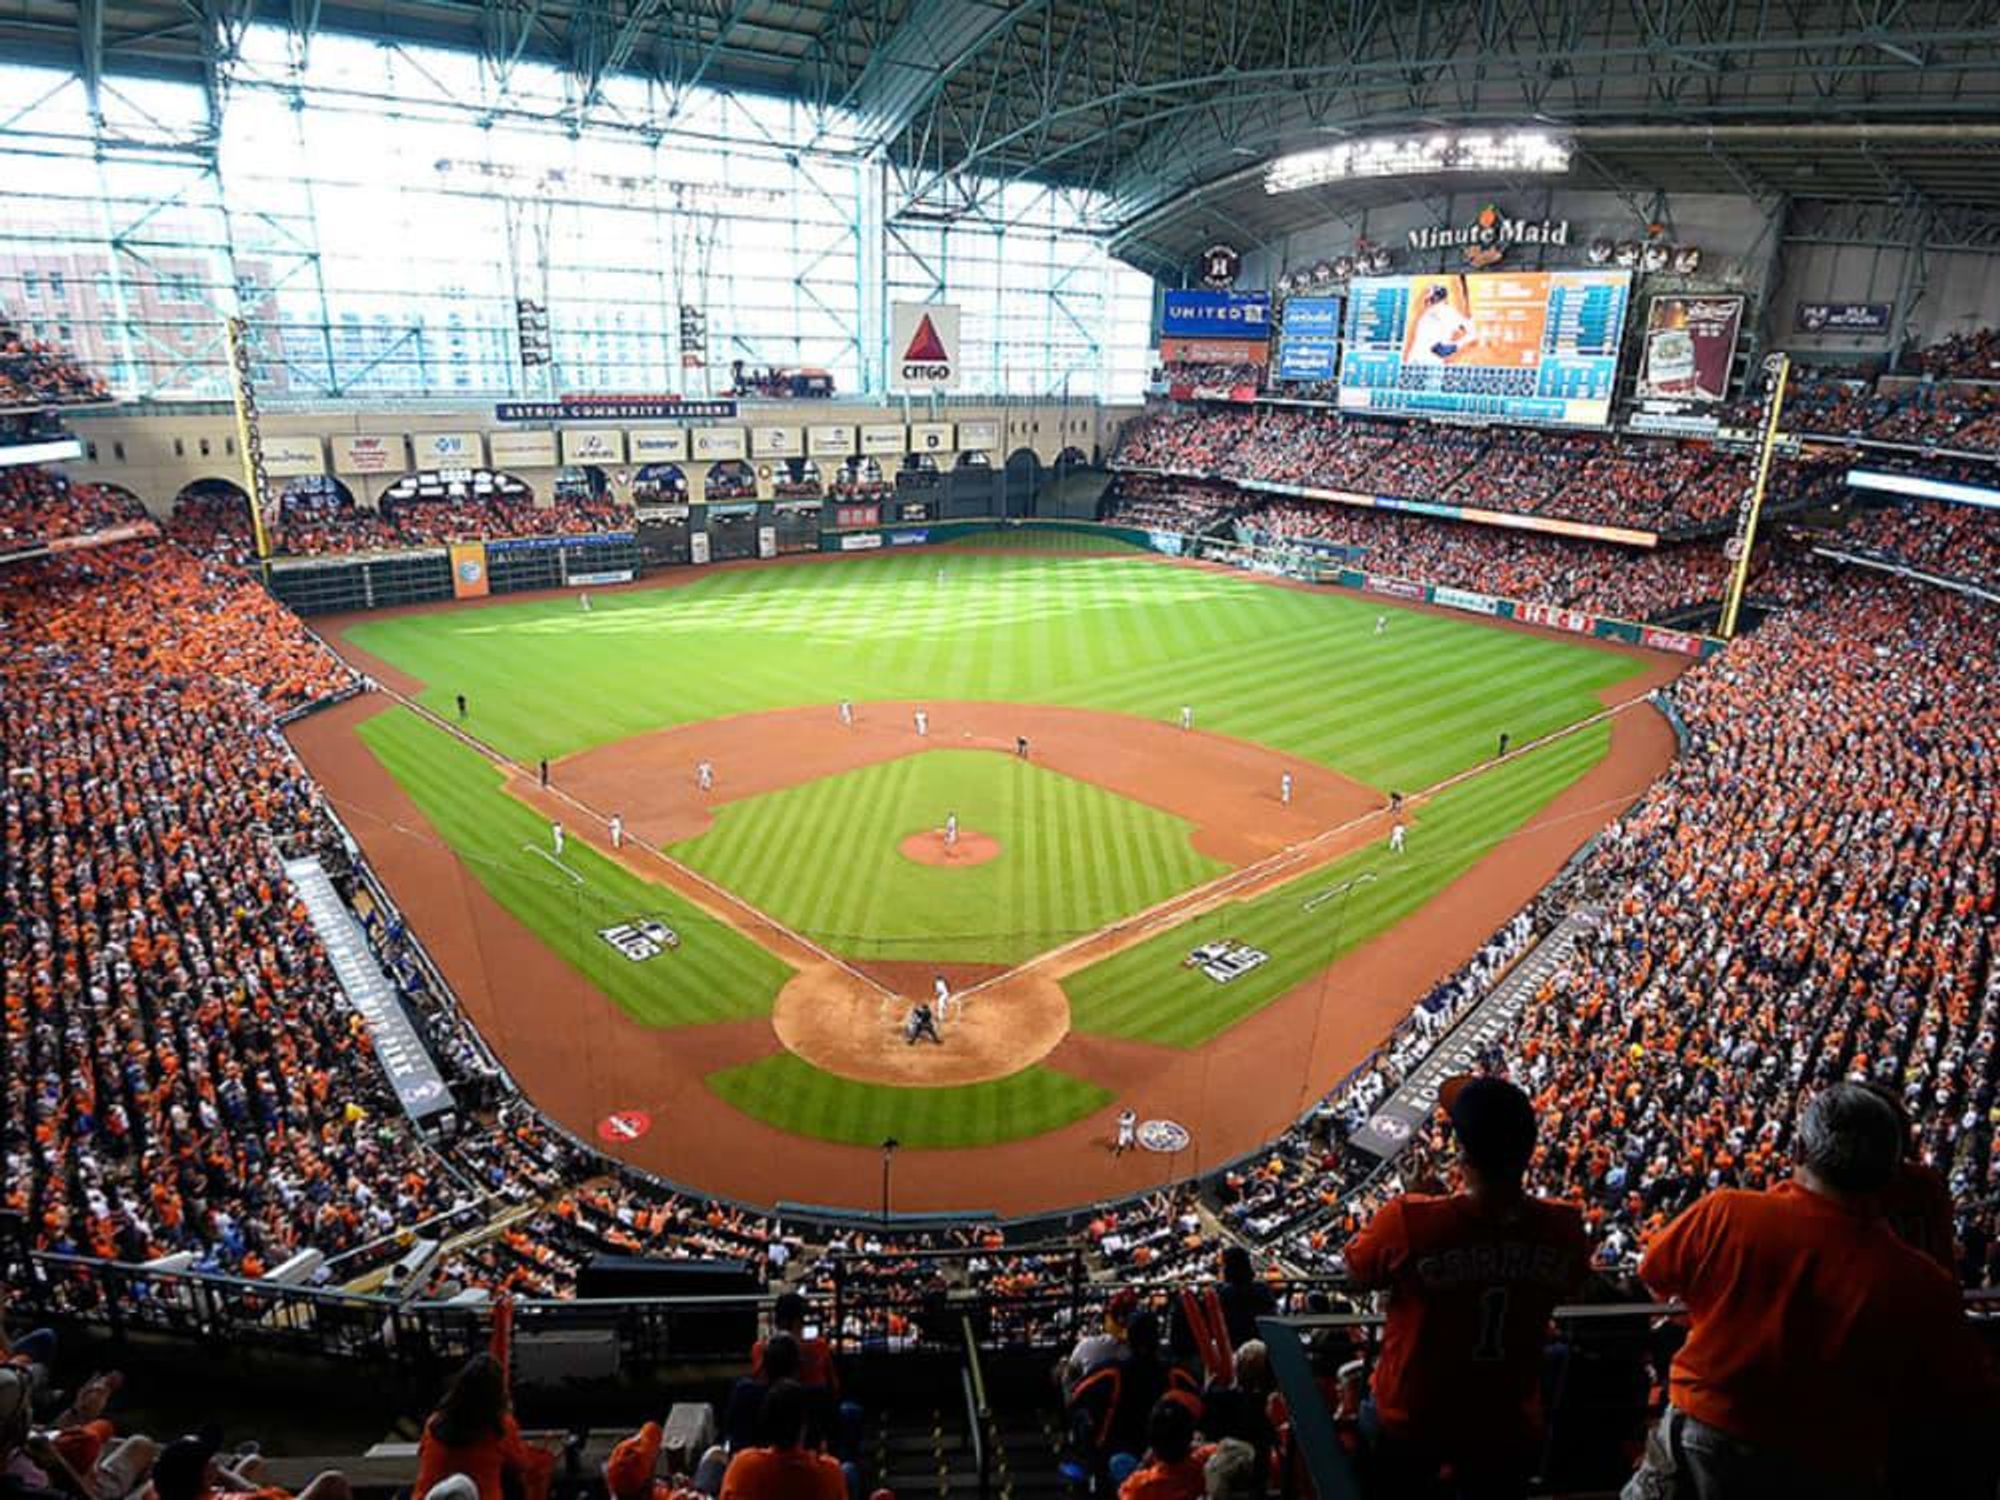 Astros fans ready to bring home seats from Minute Maid Park